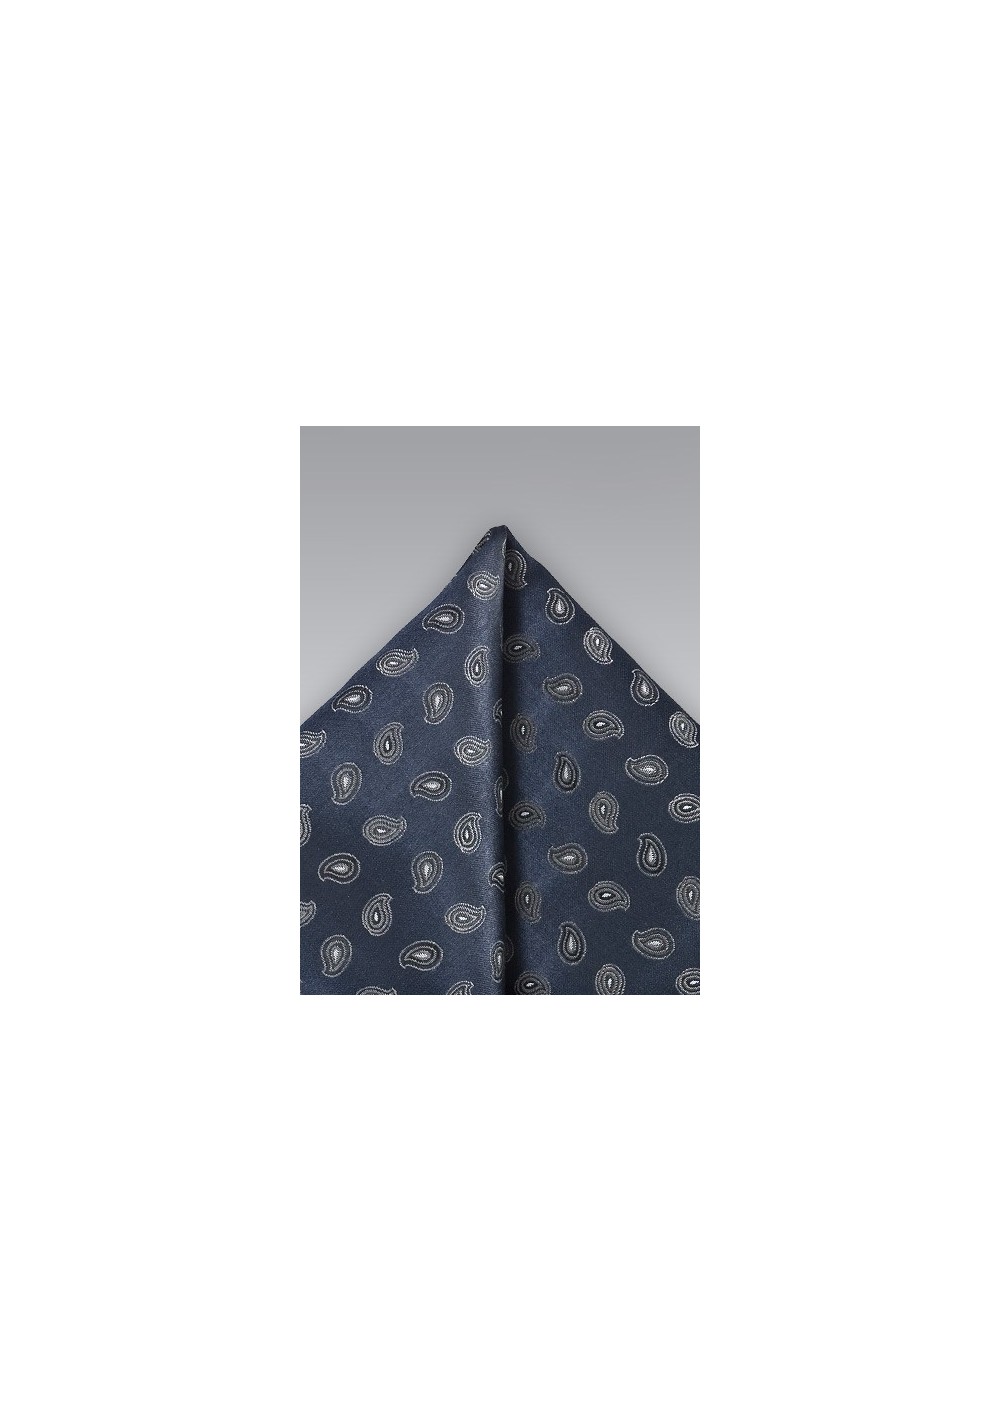 Mini Paisley Patterned Pocket Square in Navy